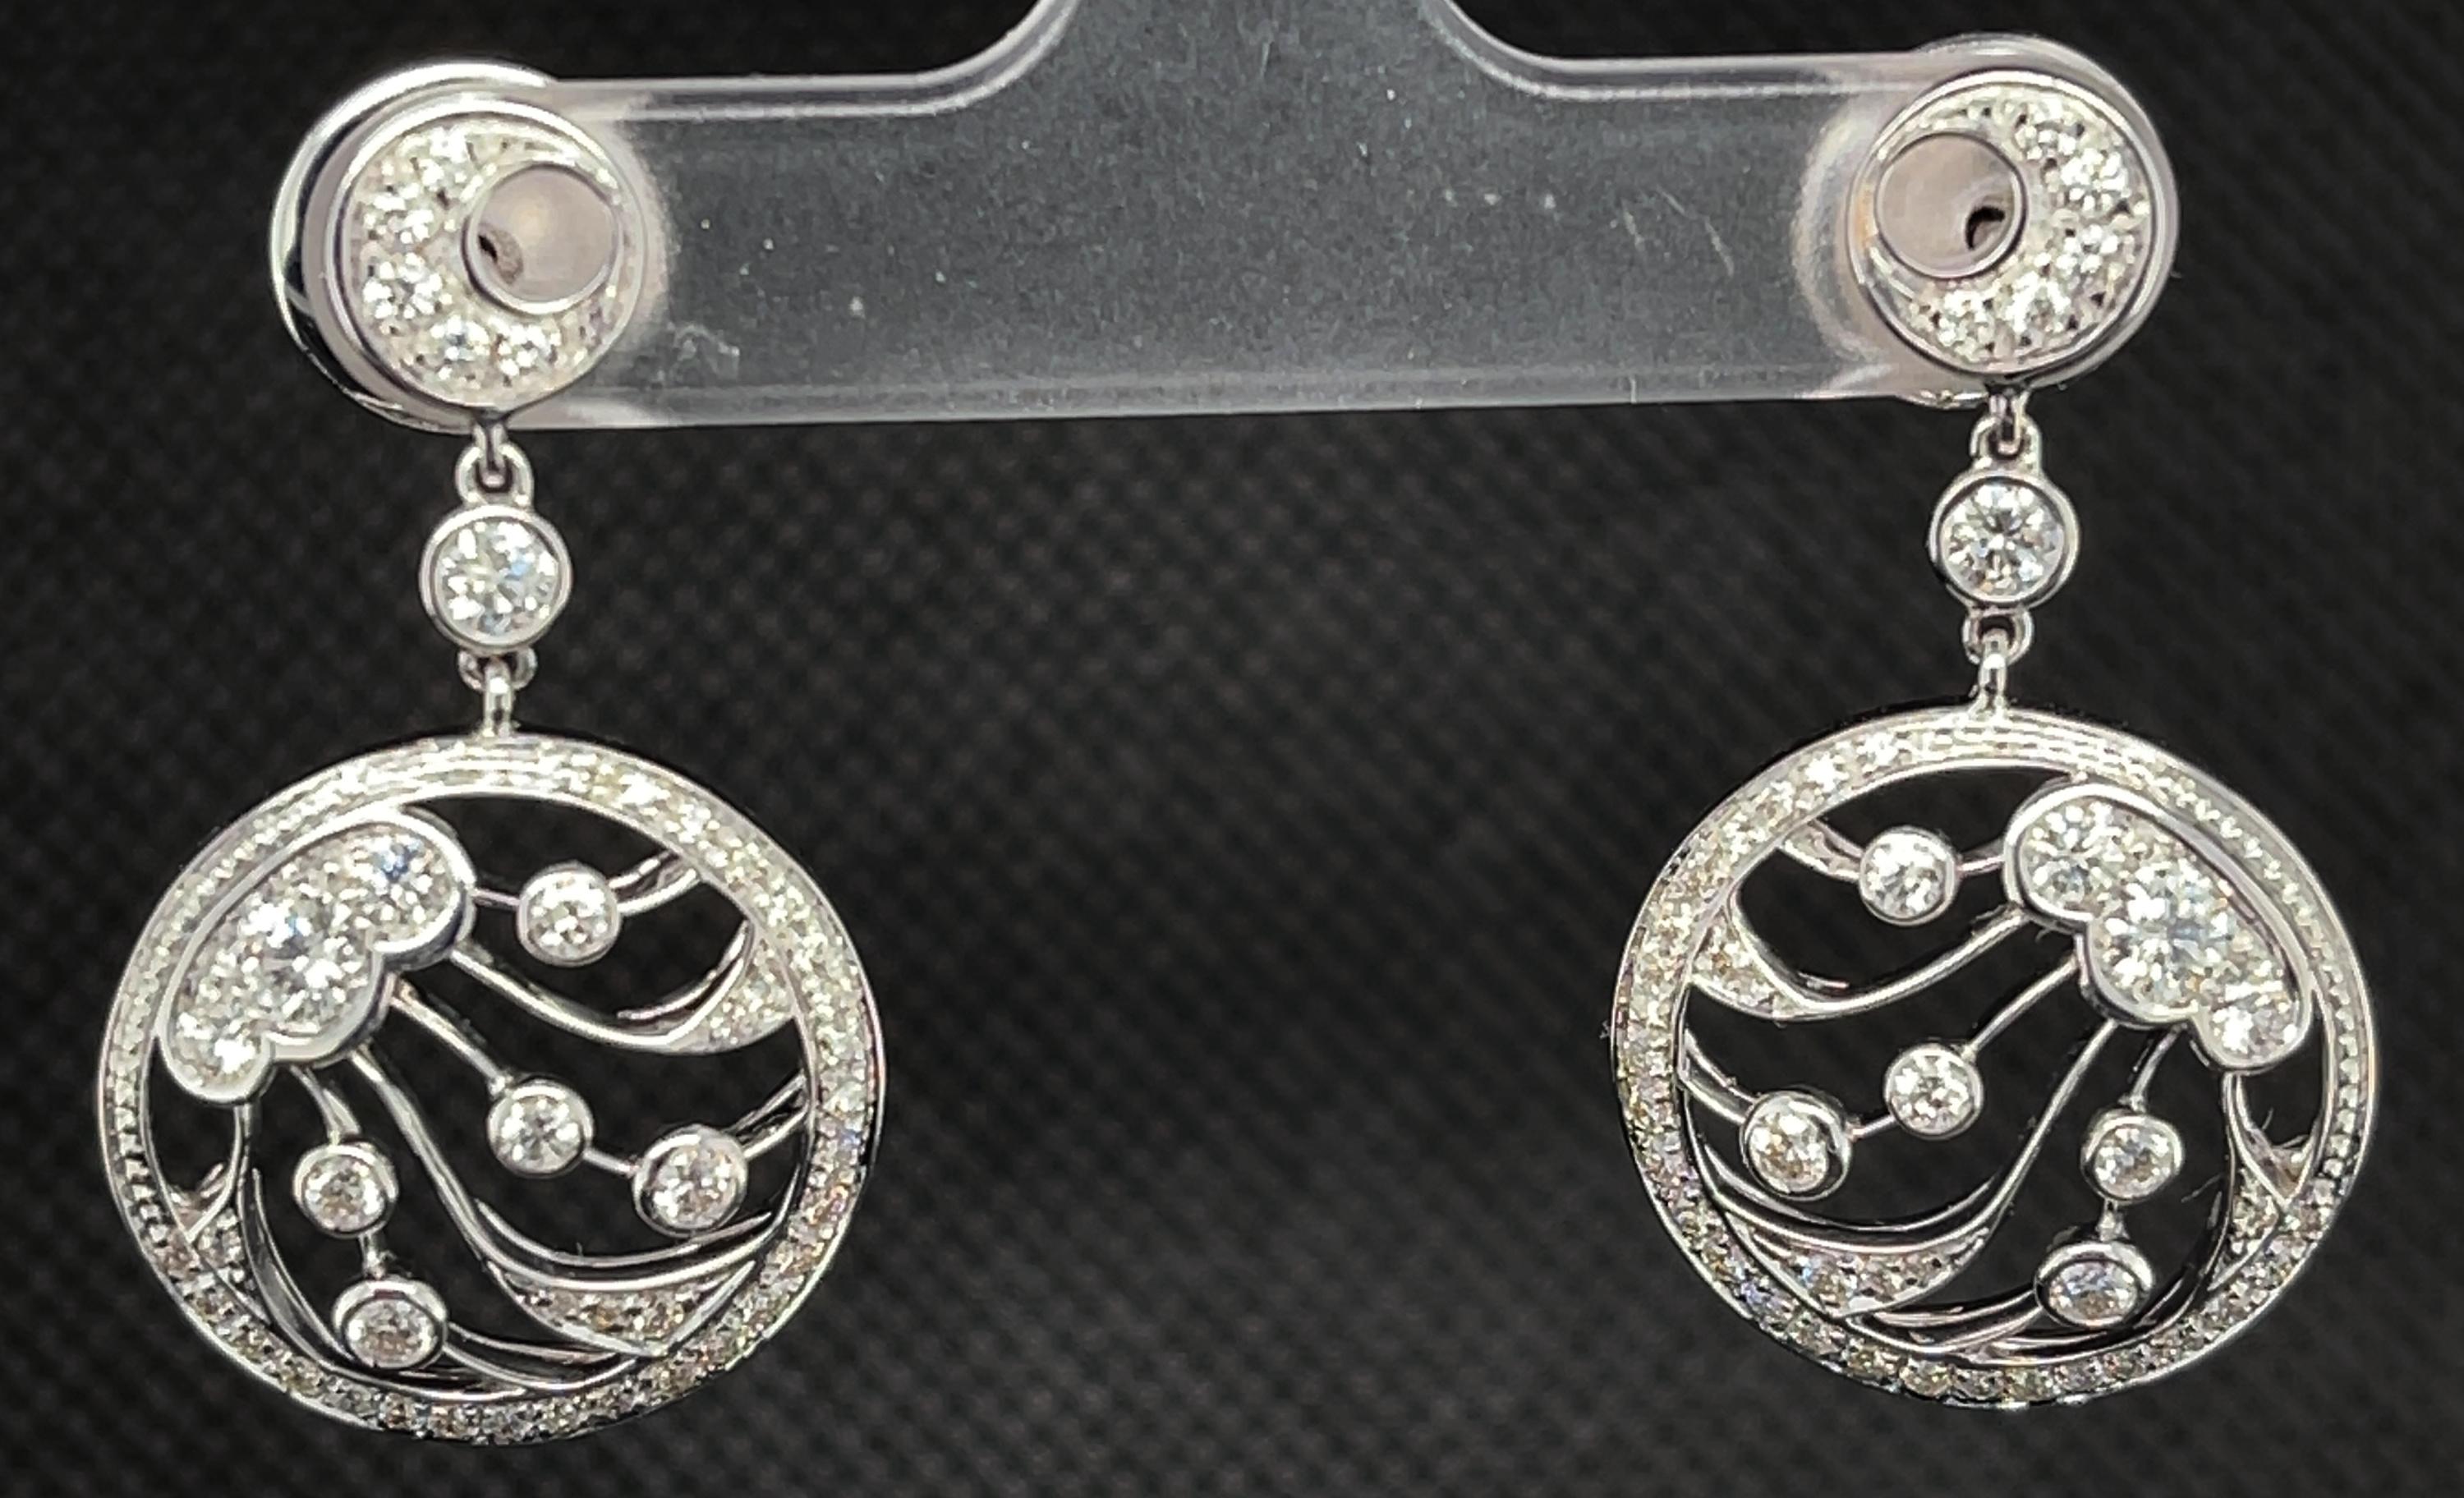 Luca Carati Italian White Gold Drop Earrings with Diamonds, 1.24 Carat Total  In New Condition For Sale In Los Angeles, CA